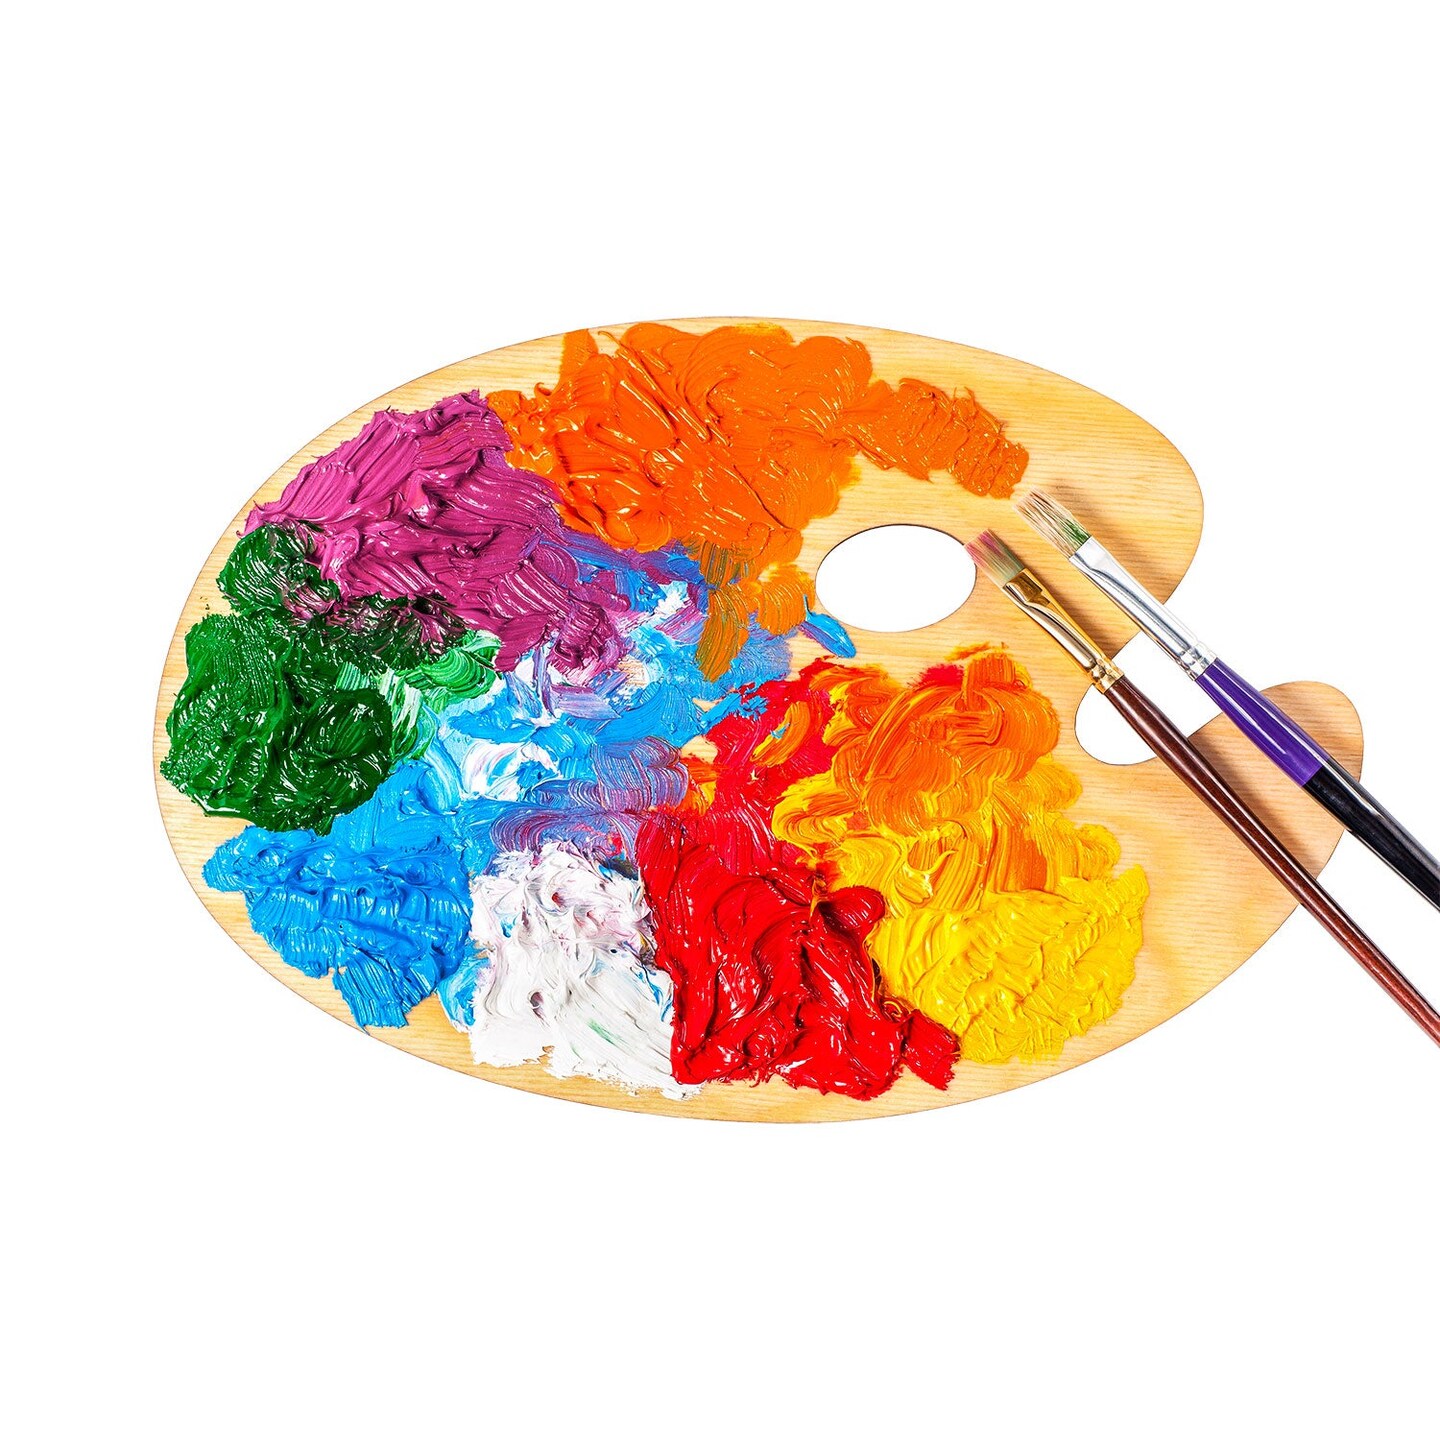 18-Well Portable Paint Palette with Lid, 2 Paint Brushes, 10 Sheets of  Paper for Acrylic, Oil Coloring (10.5 x 5 x 1 in)